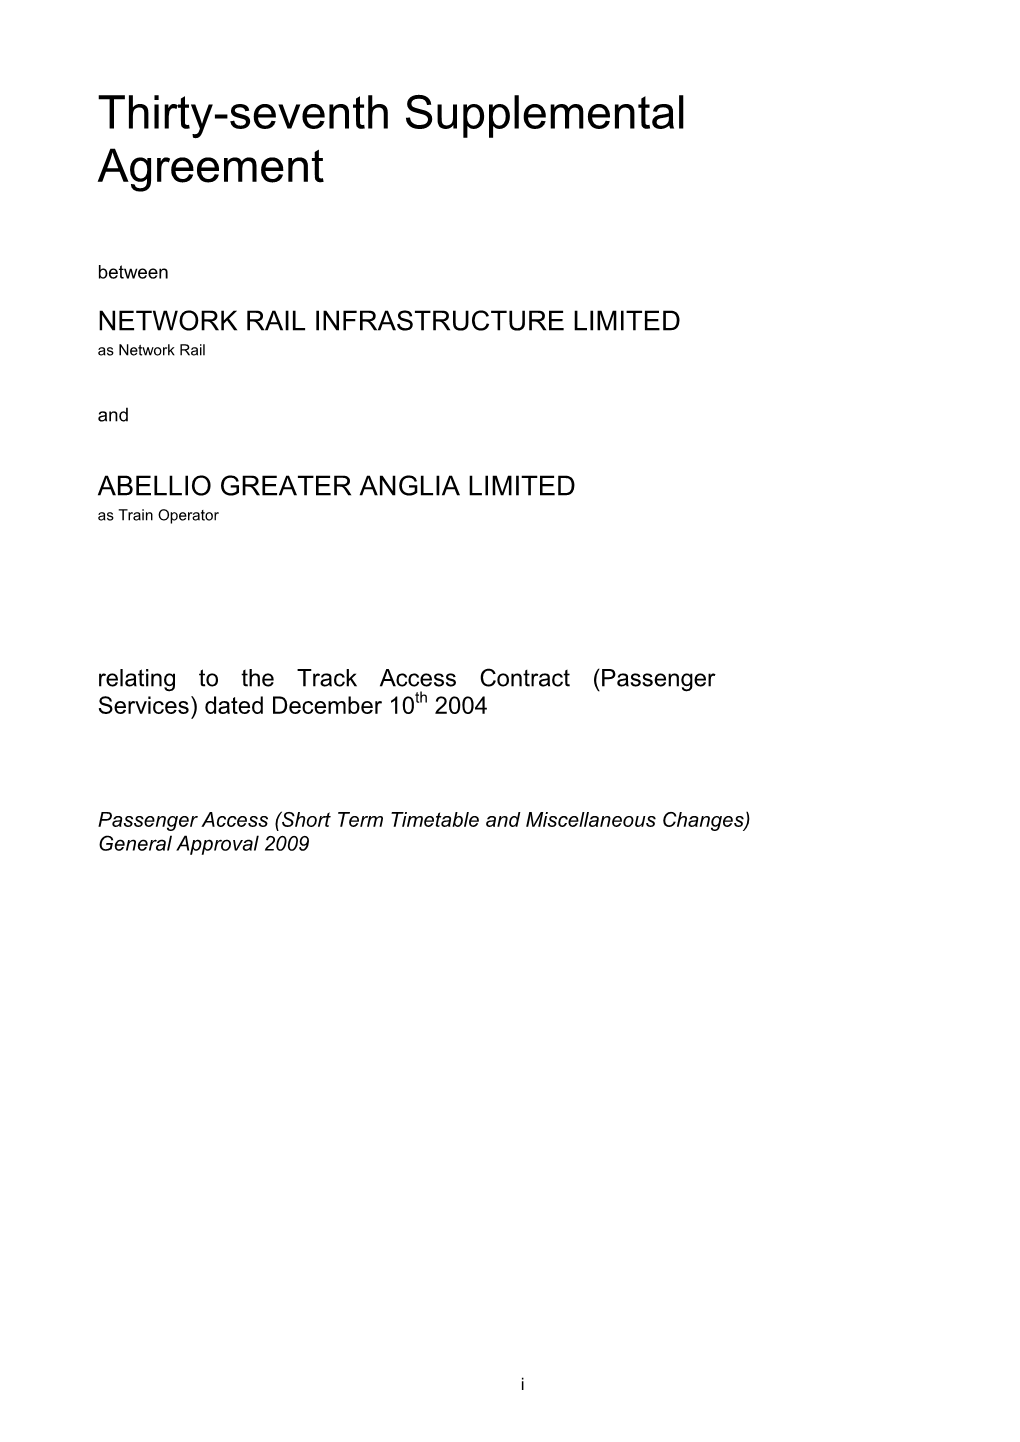 Abellio Greater Anglia Limited Section 22 37Th Supplemental Agreement